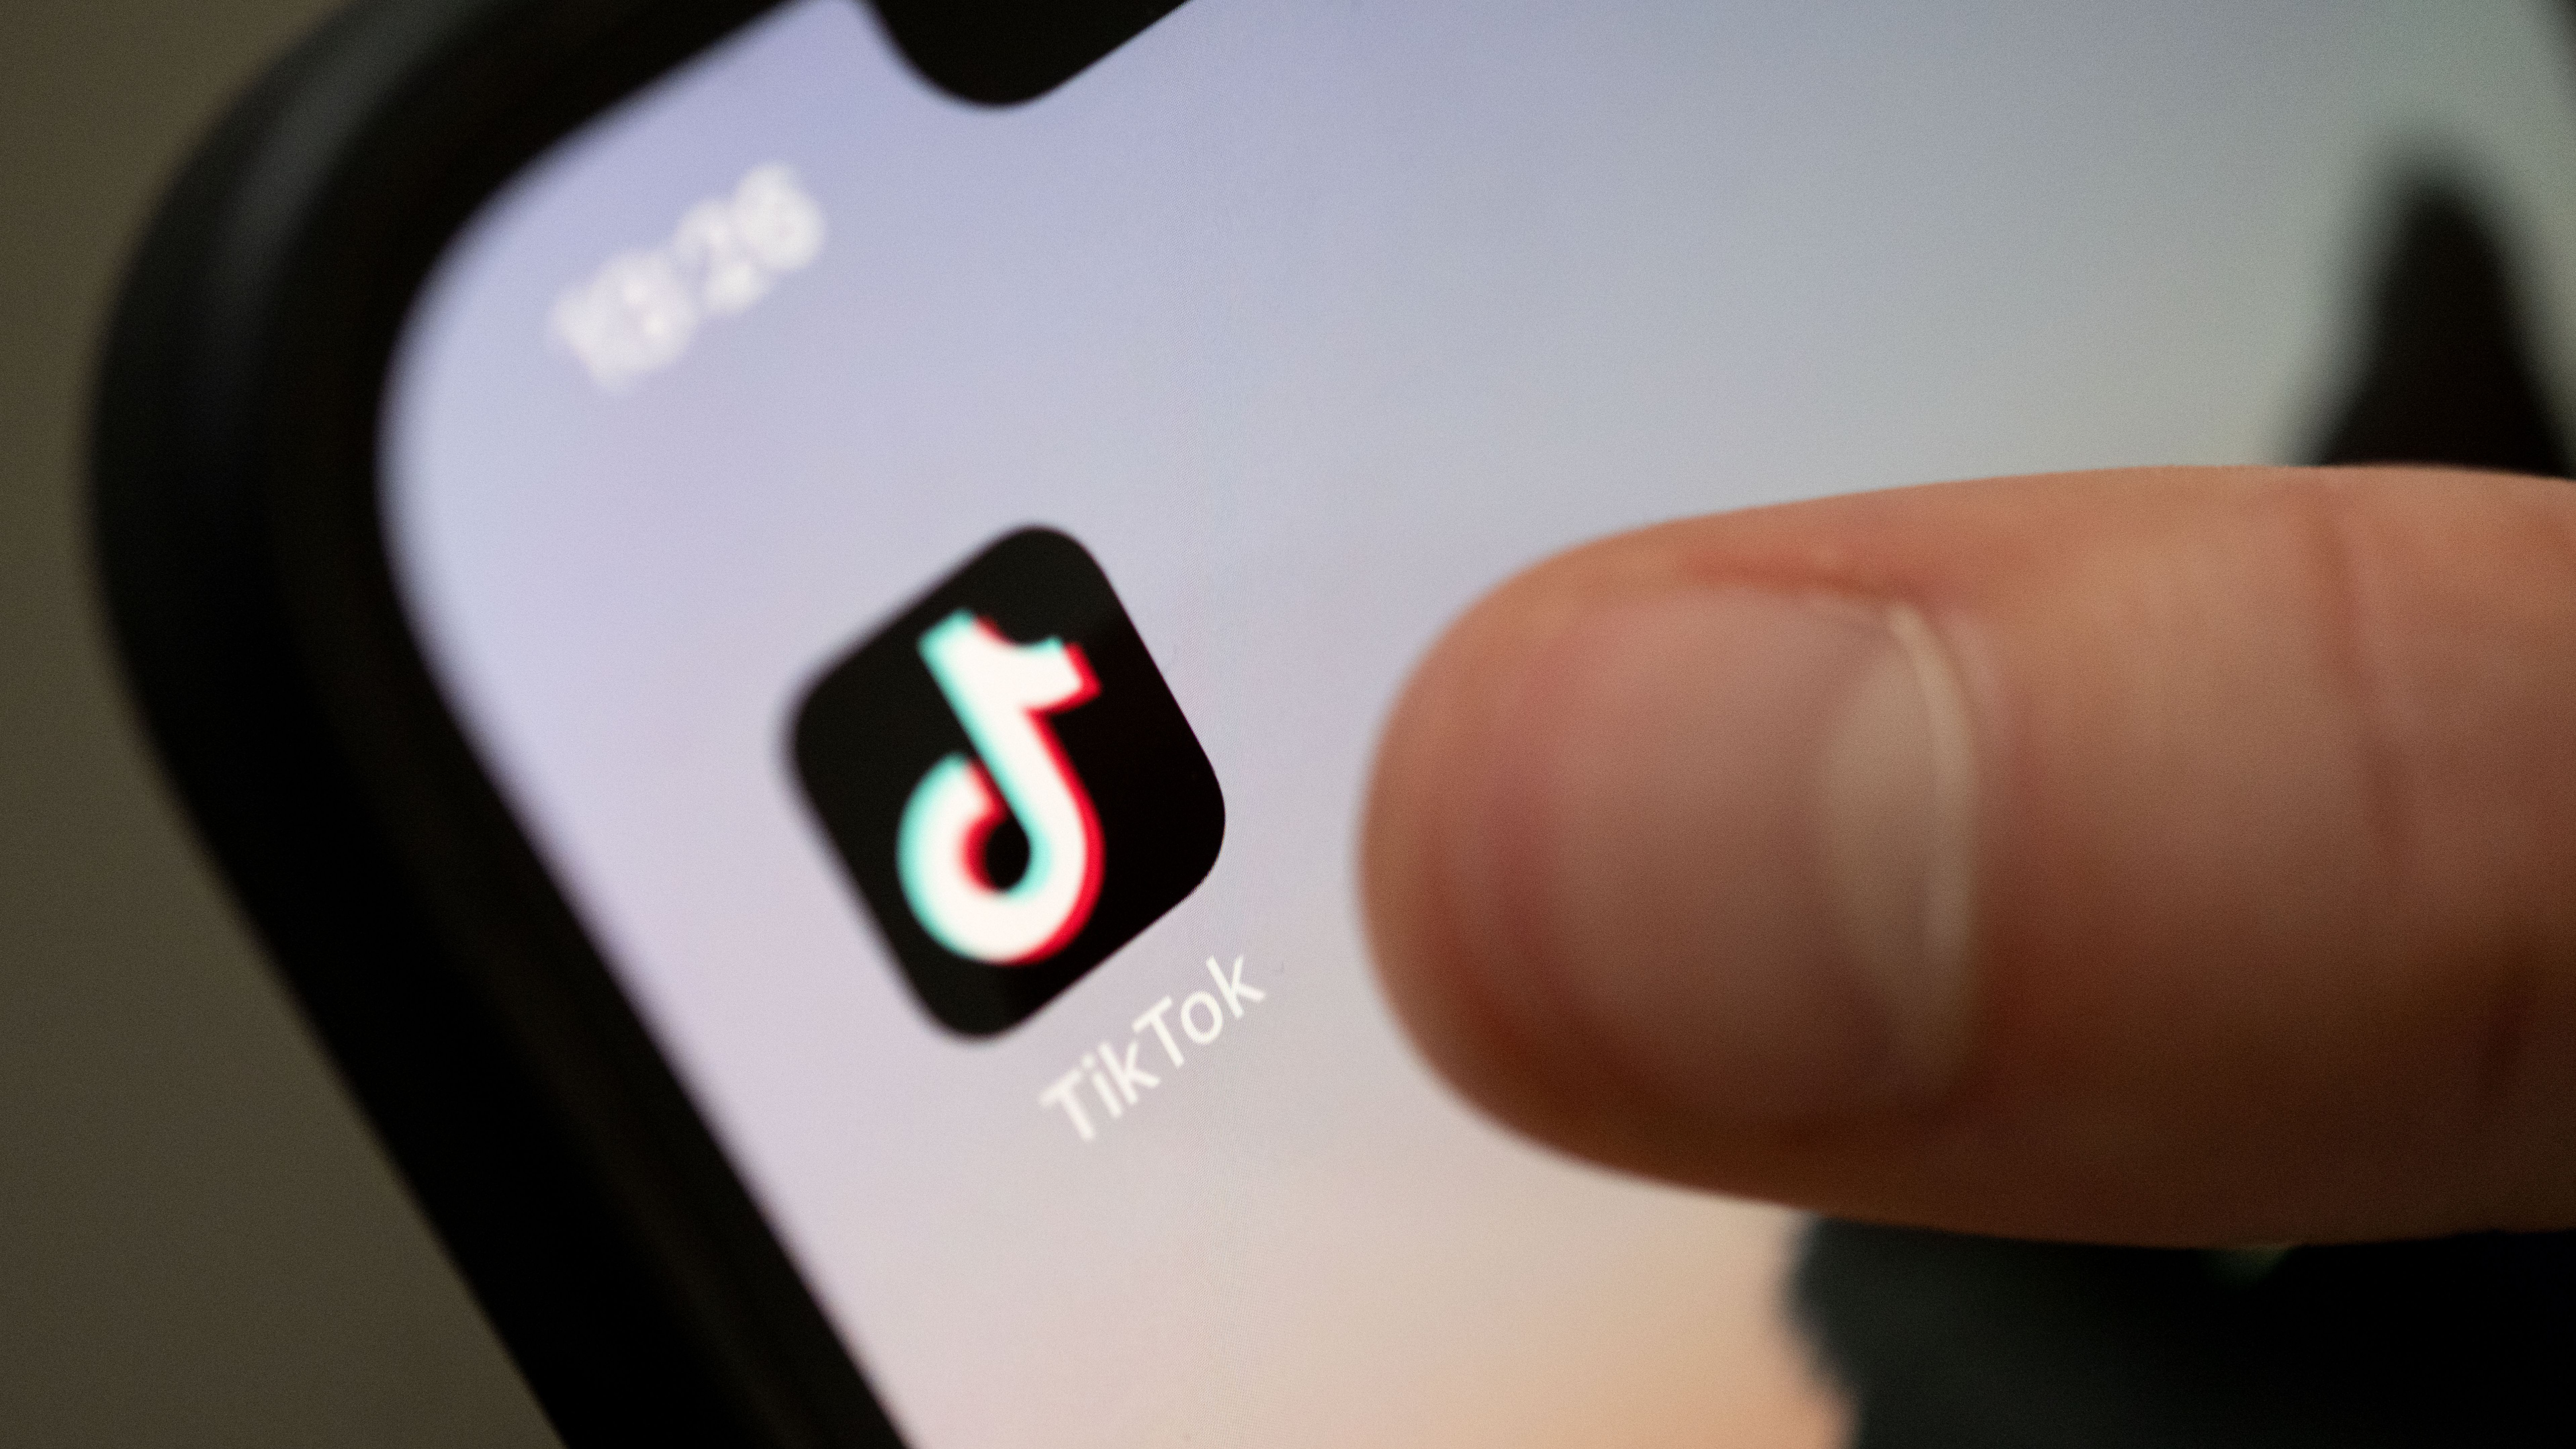 The State of Maryland prohibits access to TikTok from public institutions